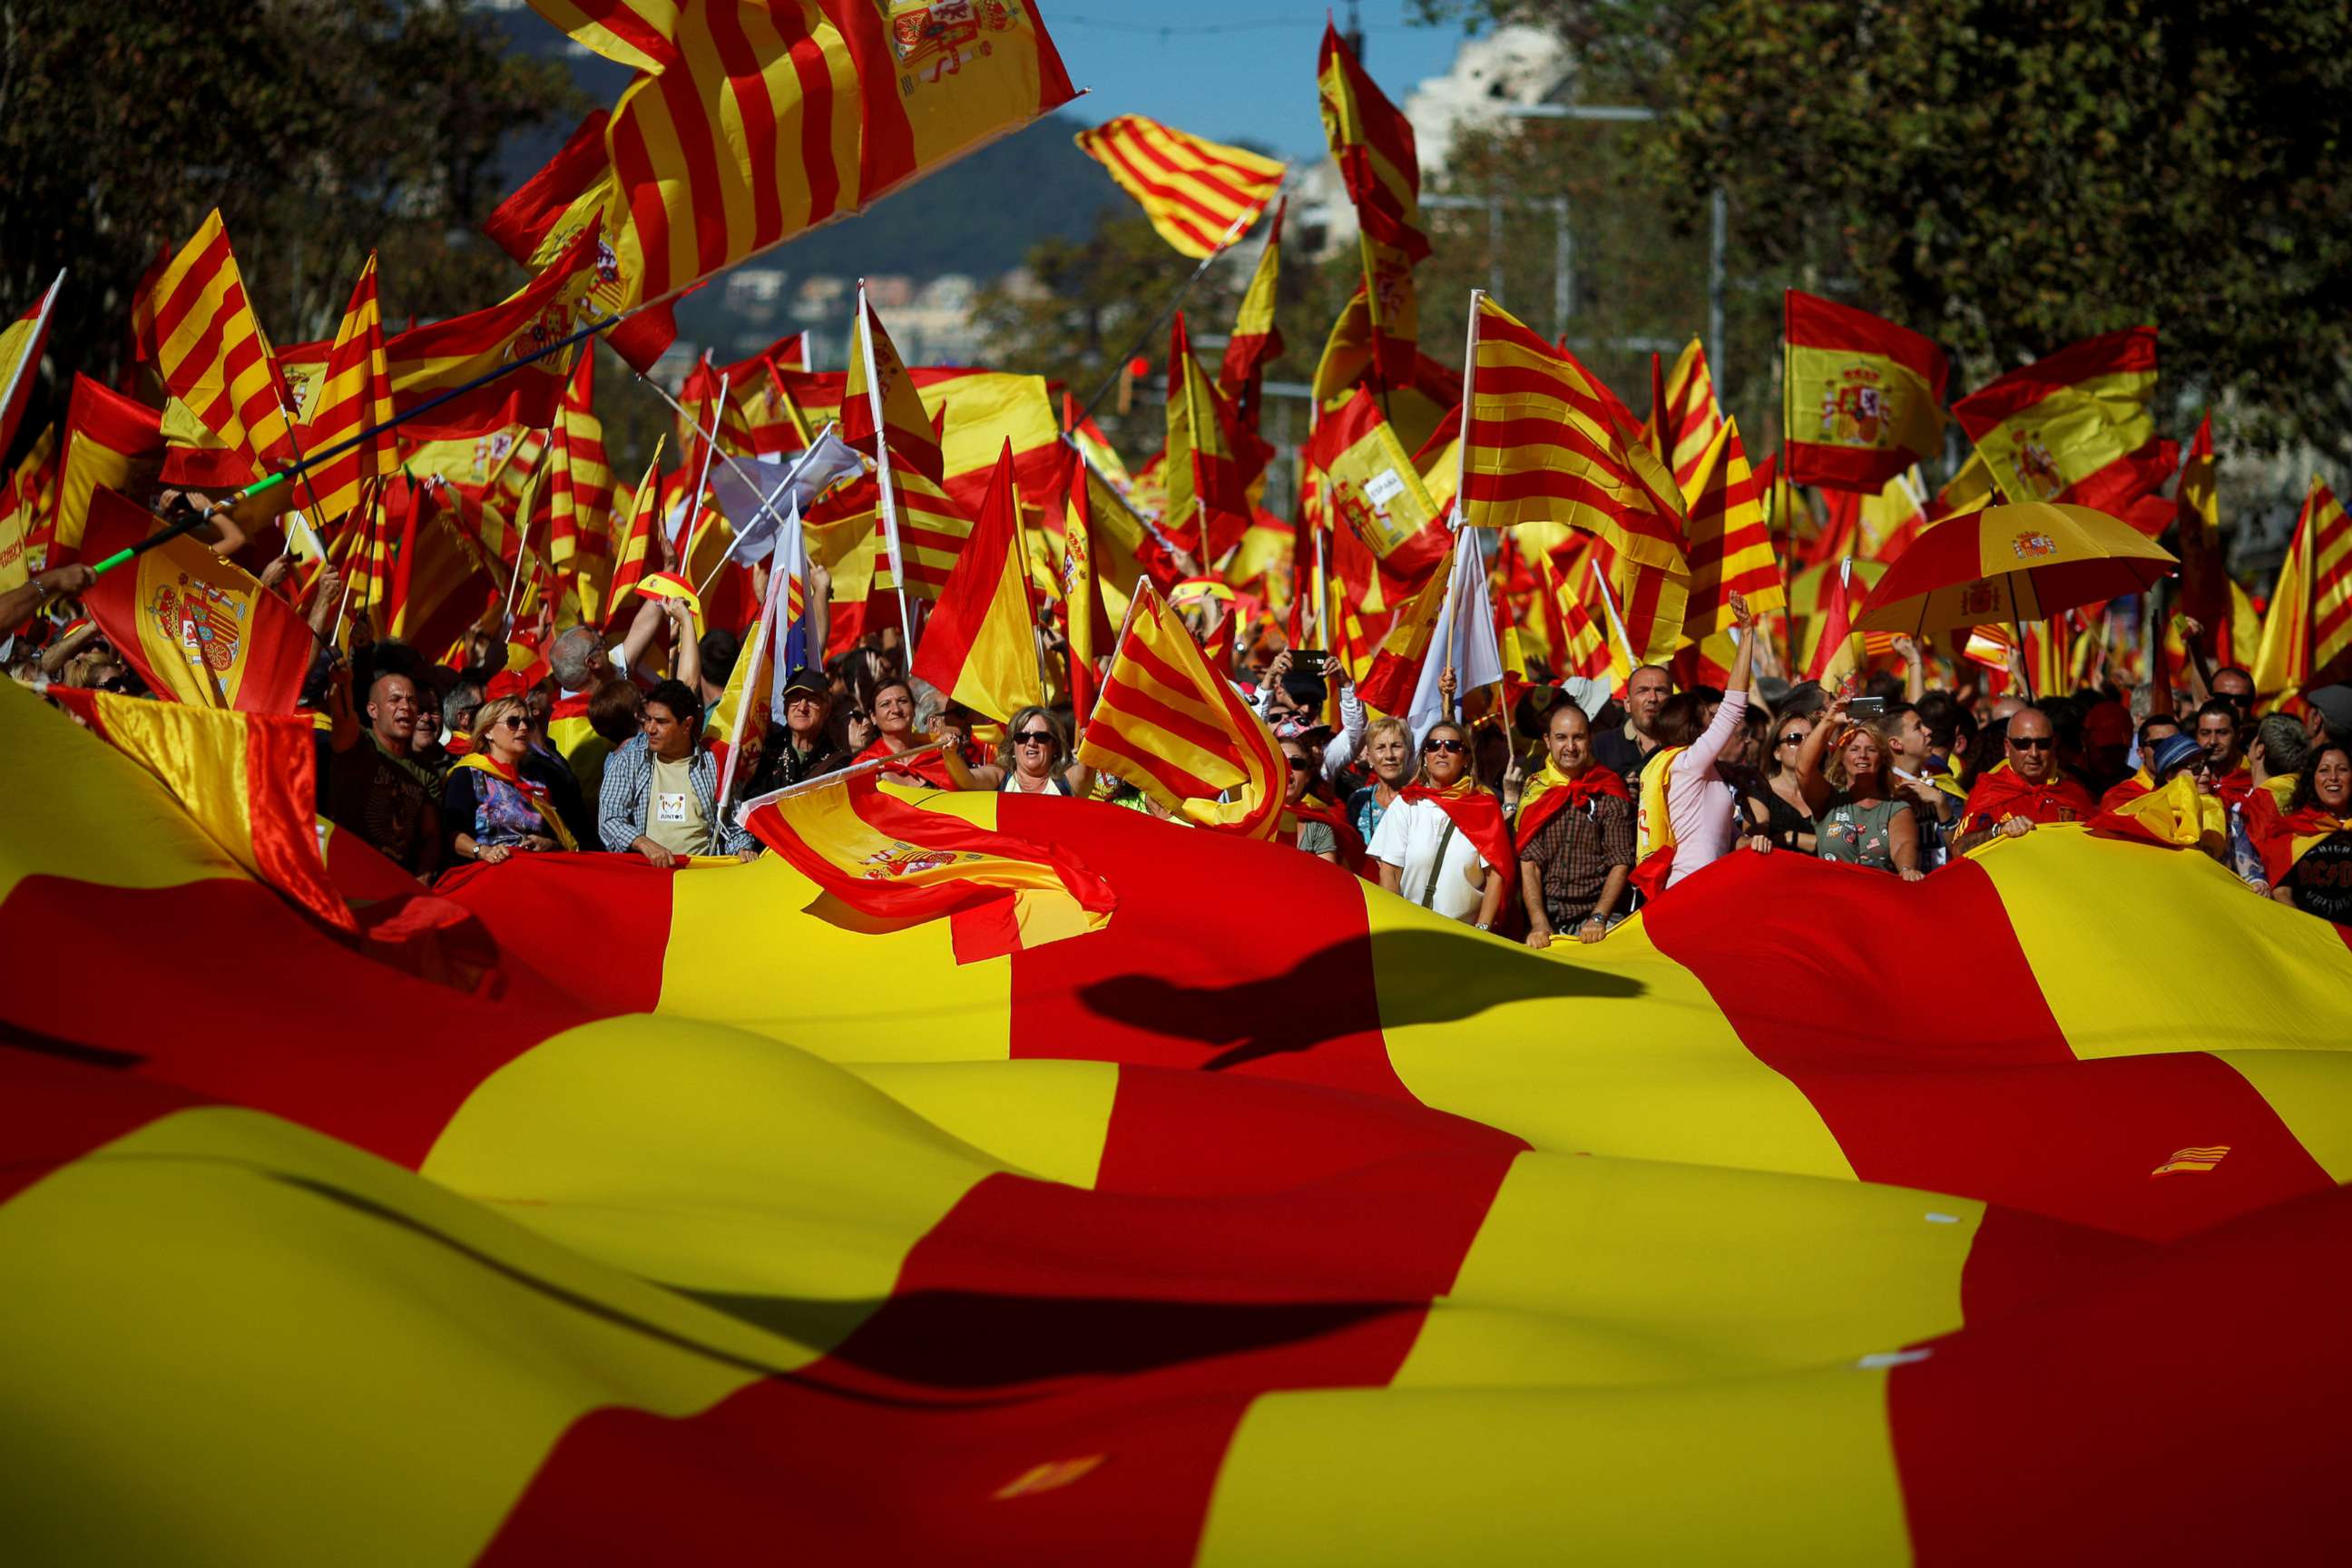 PHOTO: Pro-unity supporters take part in a demonstration in central Barcelona, Spain, Oct. 29, 2017.